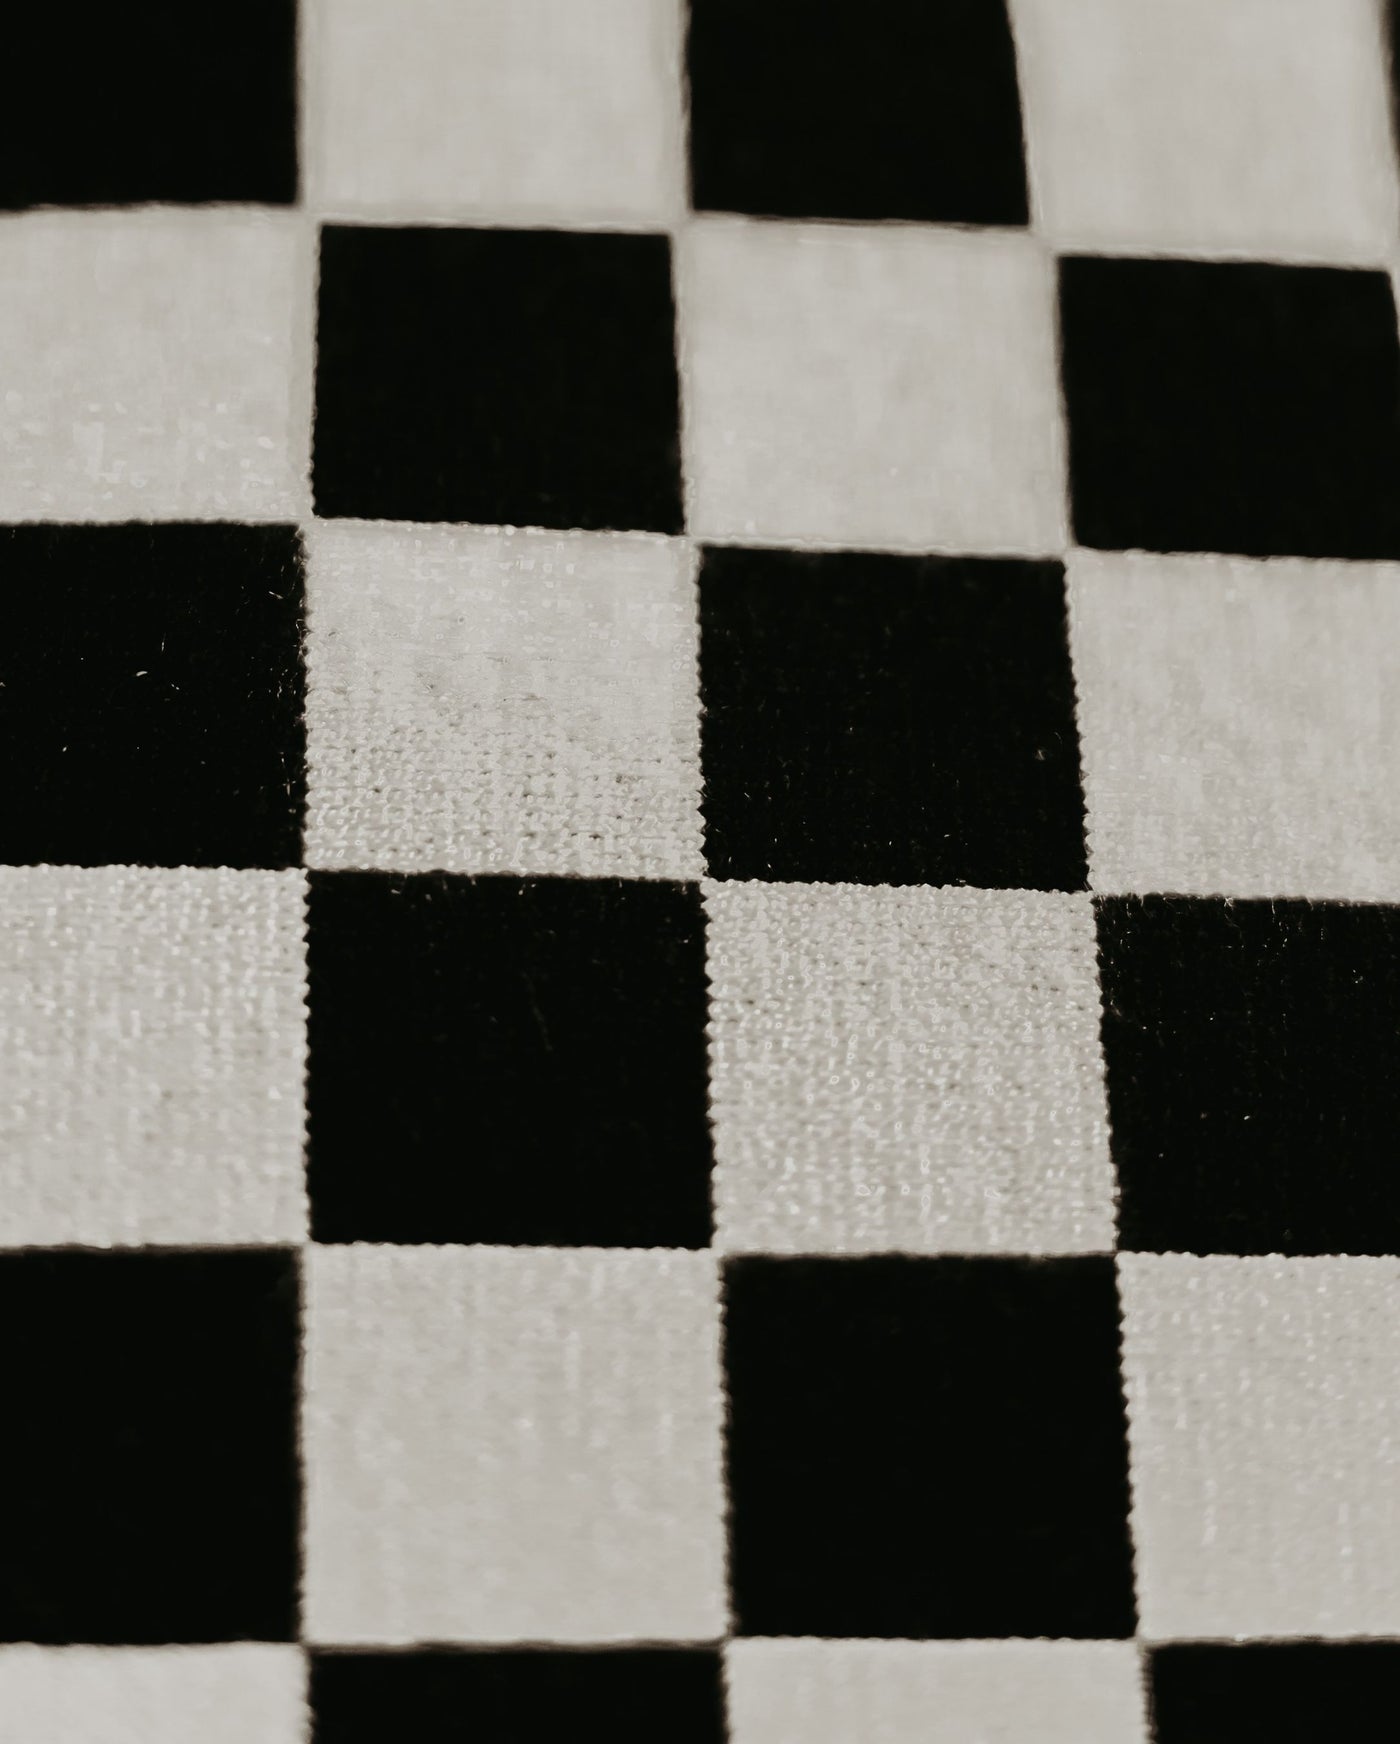 Best in Show Black Checkerboard Bed Product Image Detail